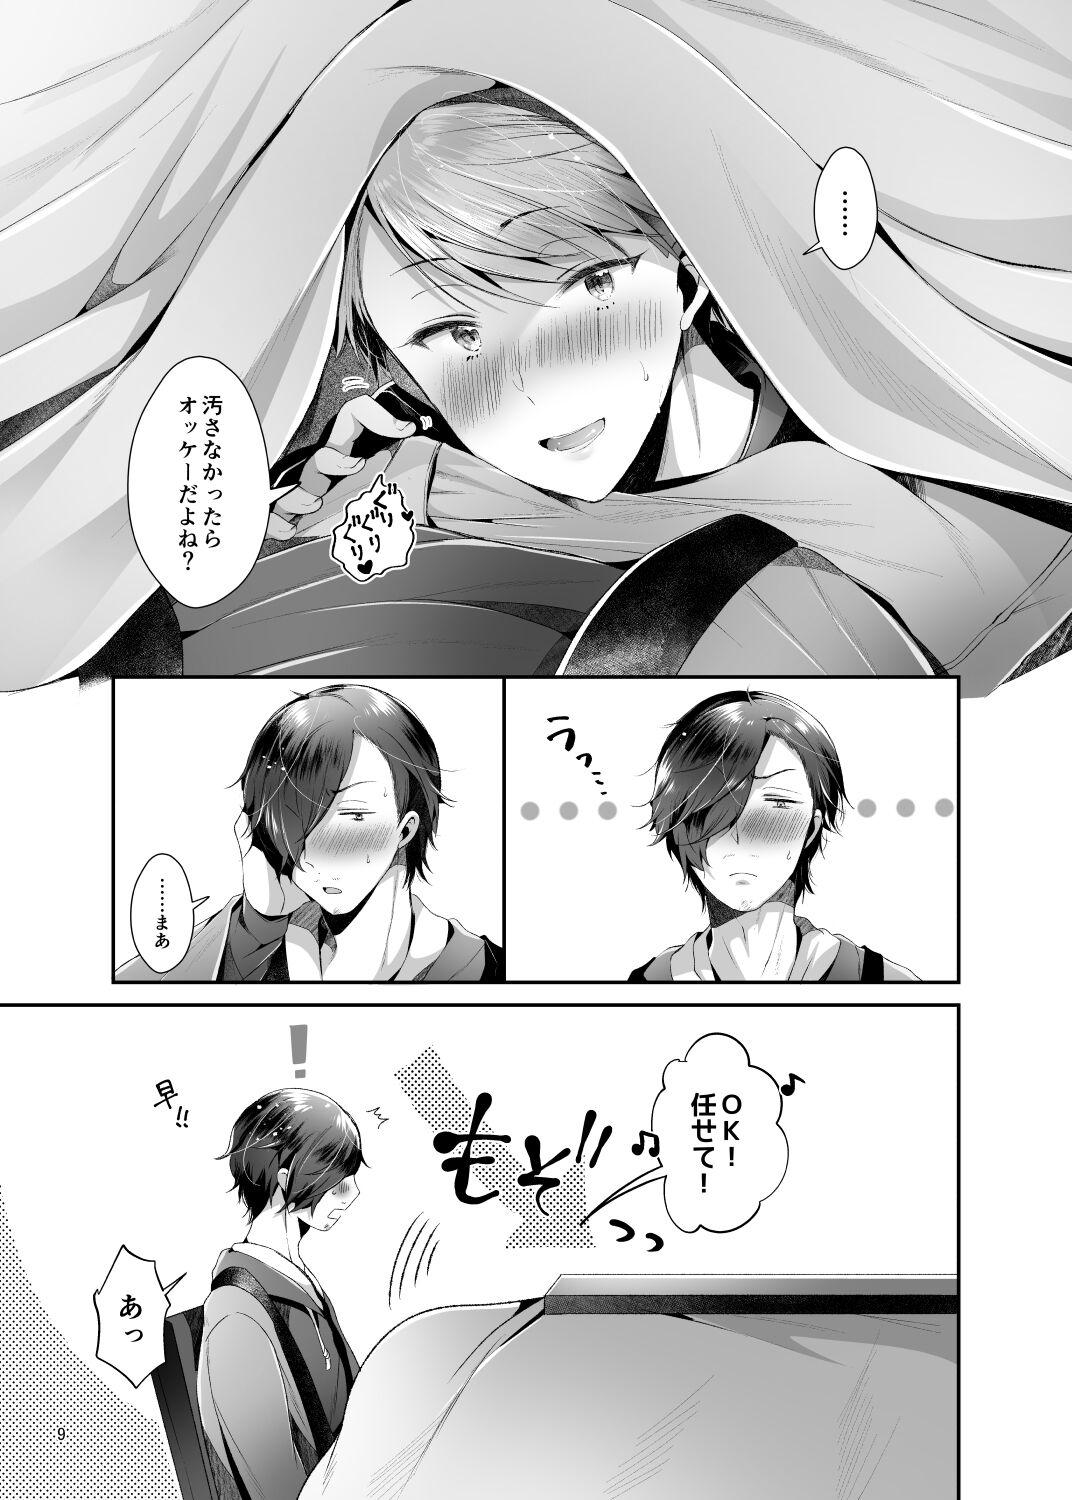 Casa Relax at home - The idolmaster sidem 8teen - Page 10